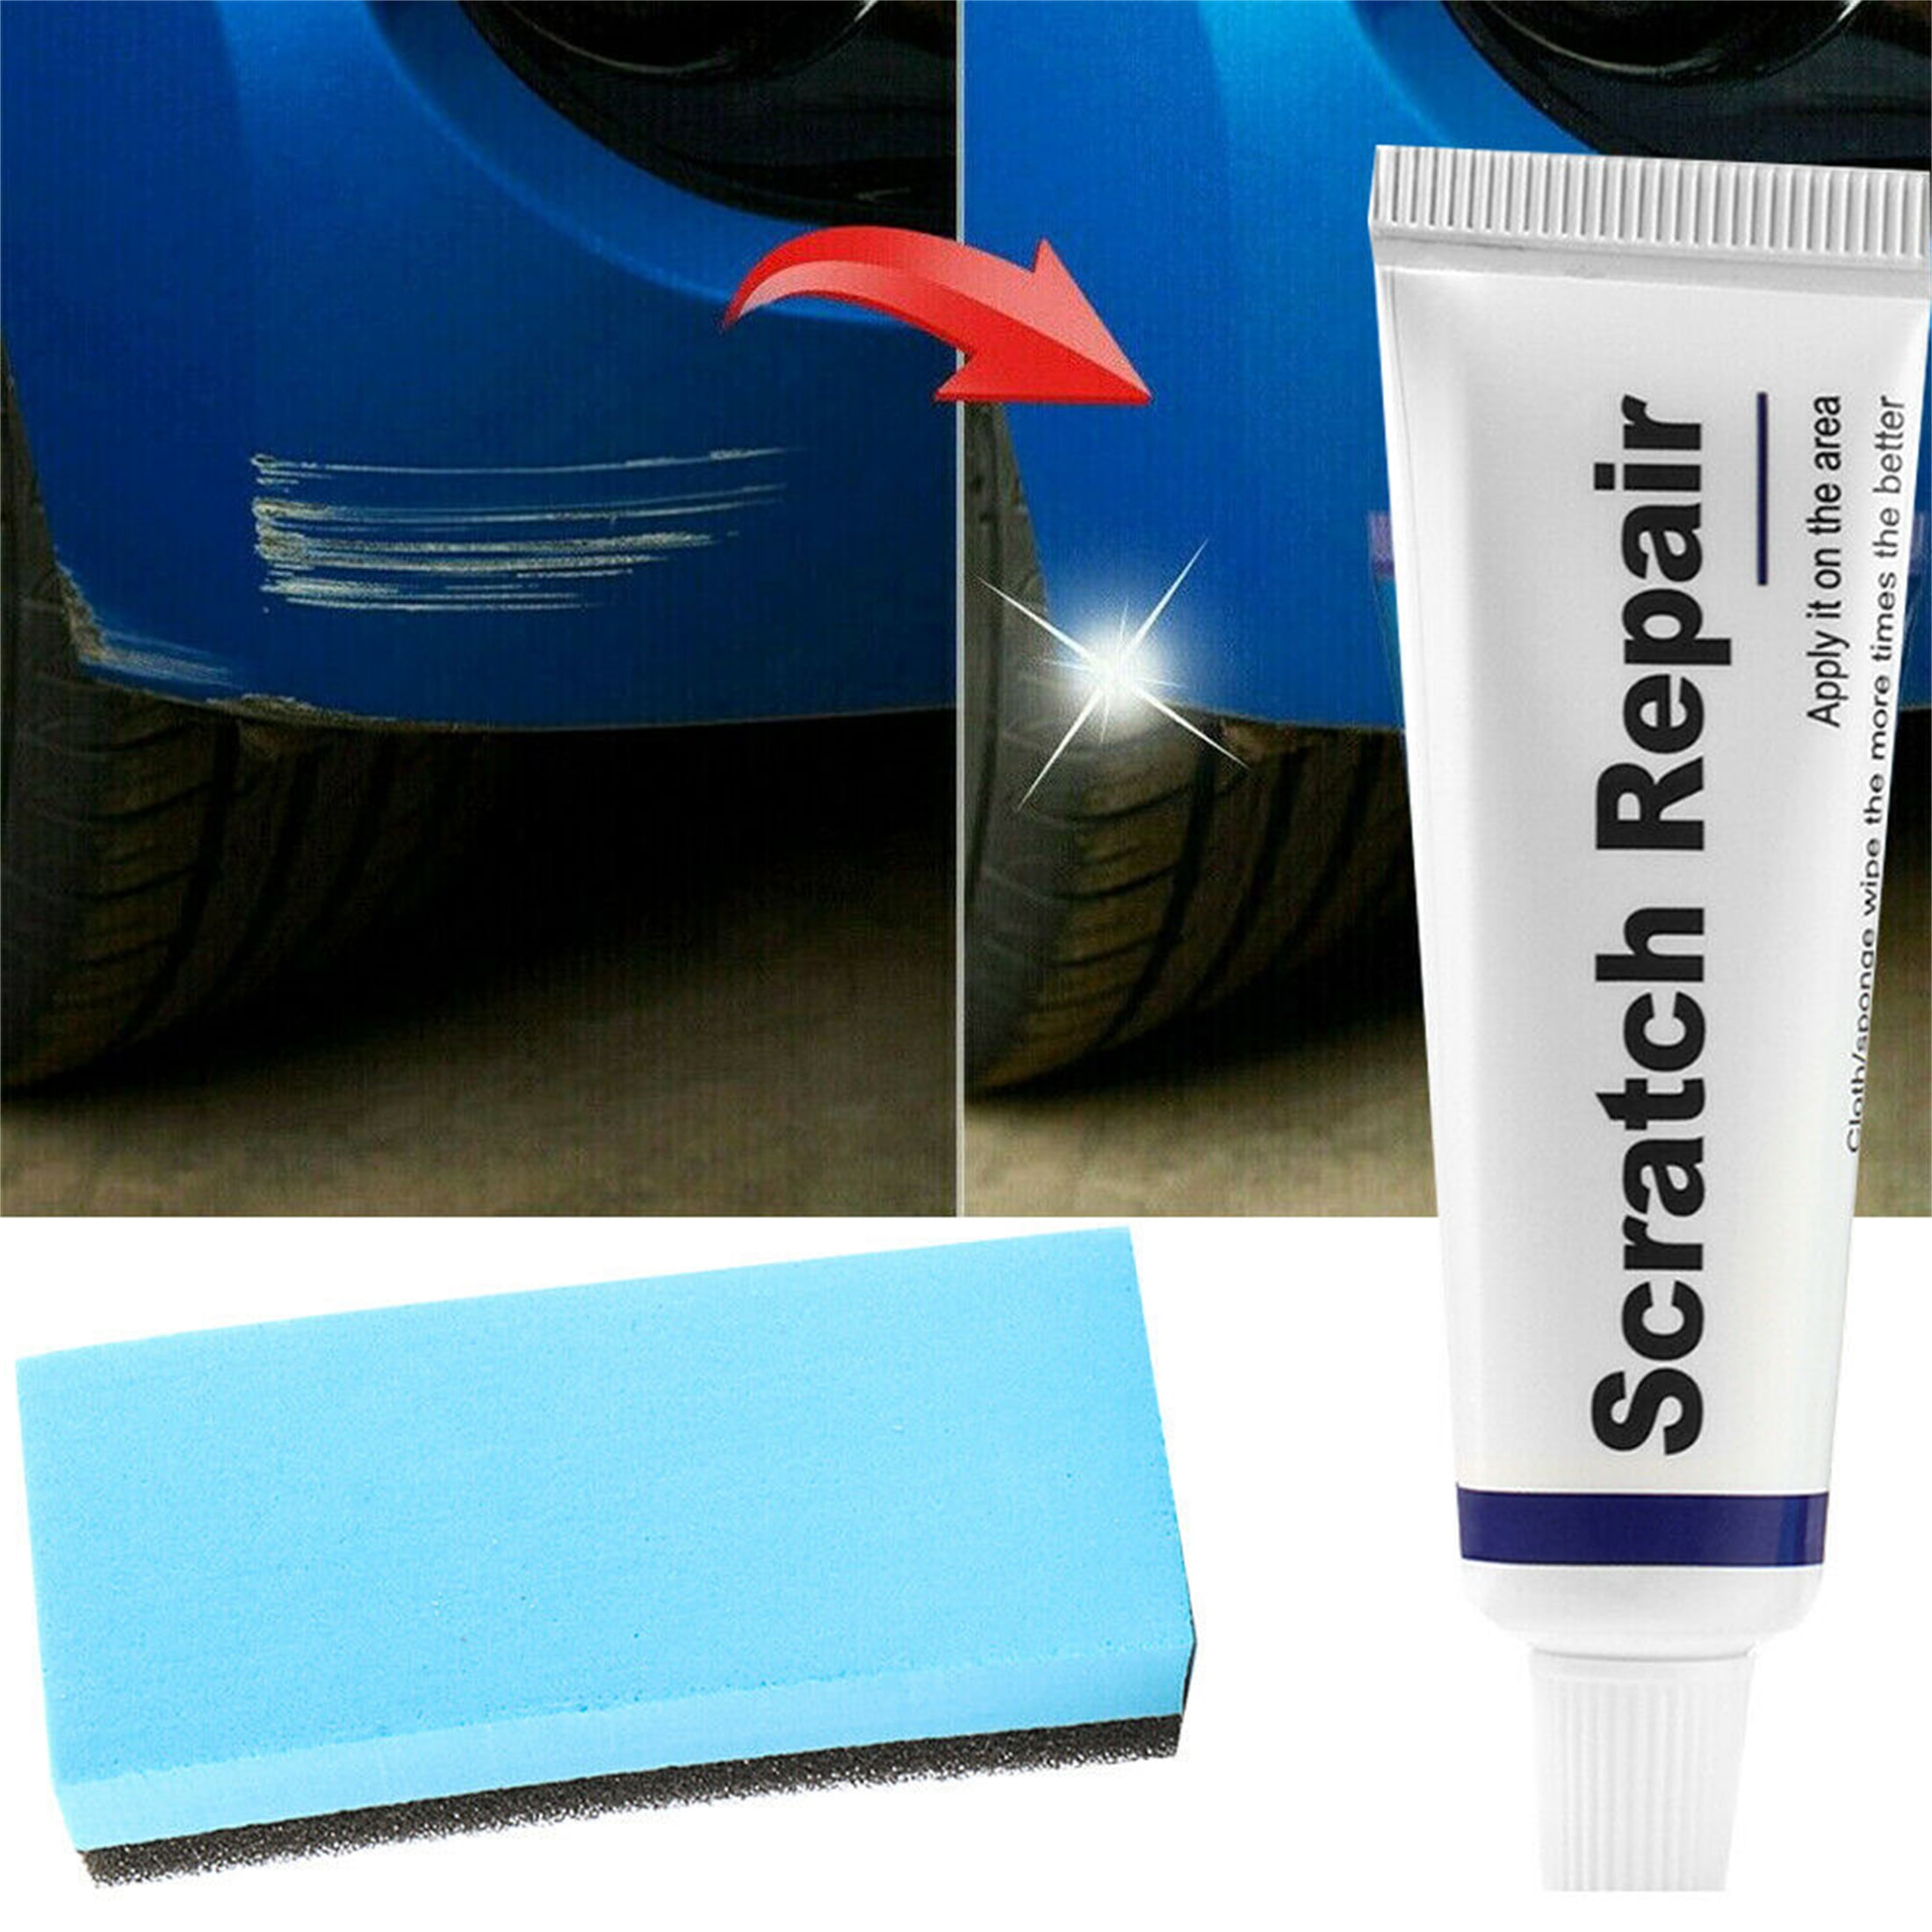 Car Scratch and Swirl Remover Auto Scratch Repair Tool Polishing Wax Car  Accessories 